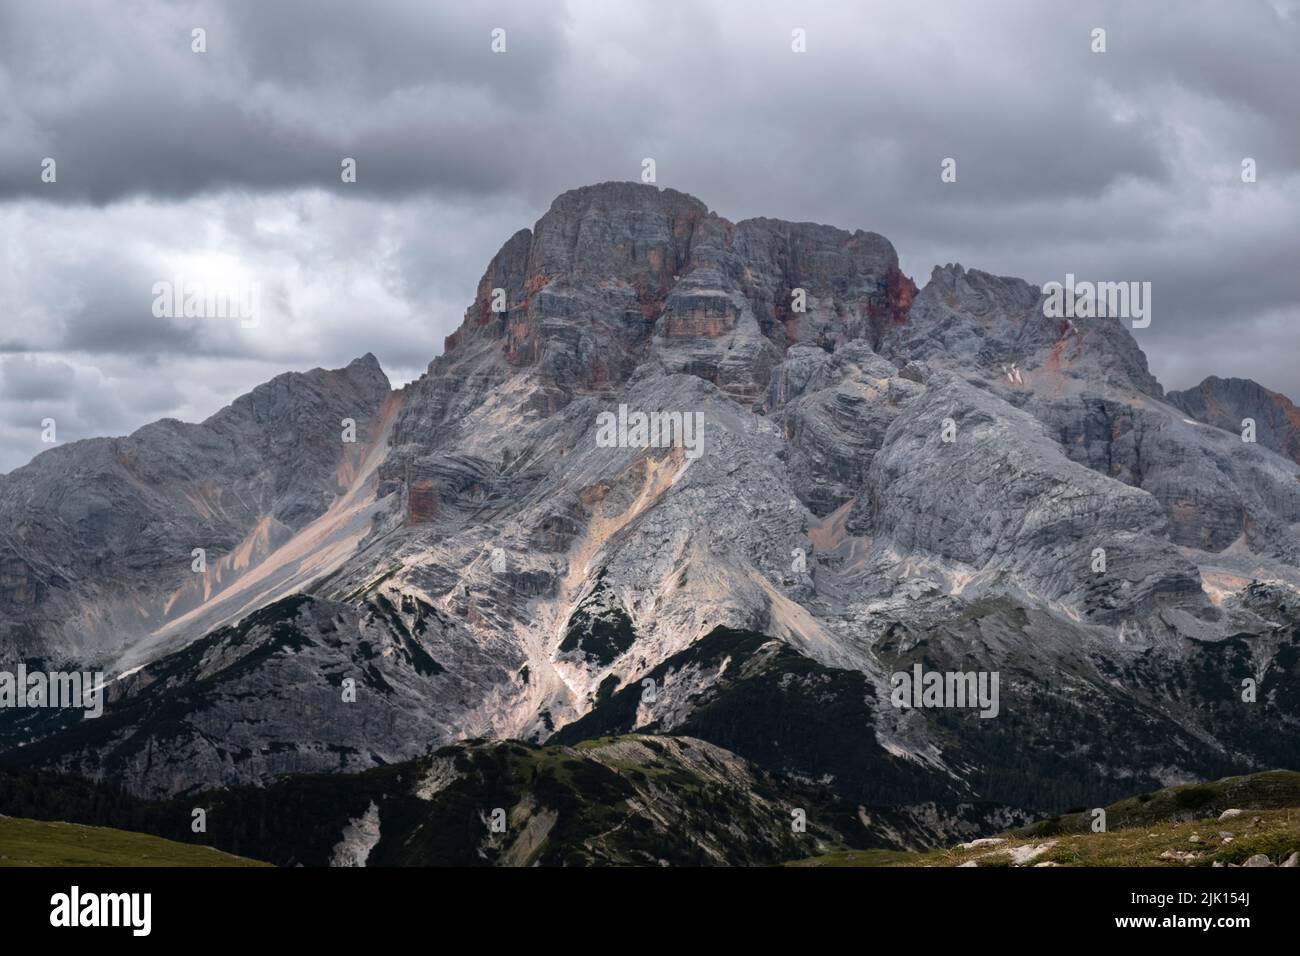 Croda Rossa D'Ampezzo mountain view from the top of Monte Specie with clouds in the sky, Dolomites, Italy, Europe Stock Photo